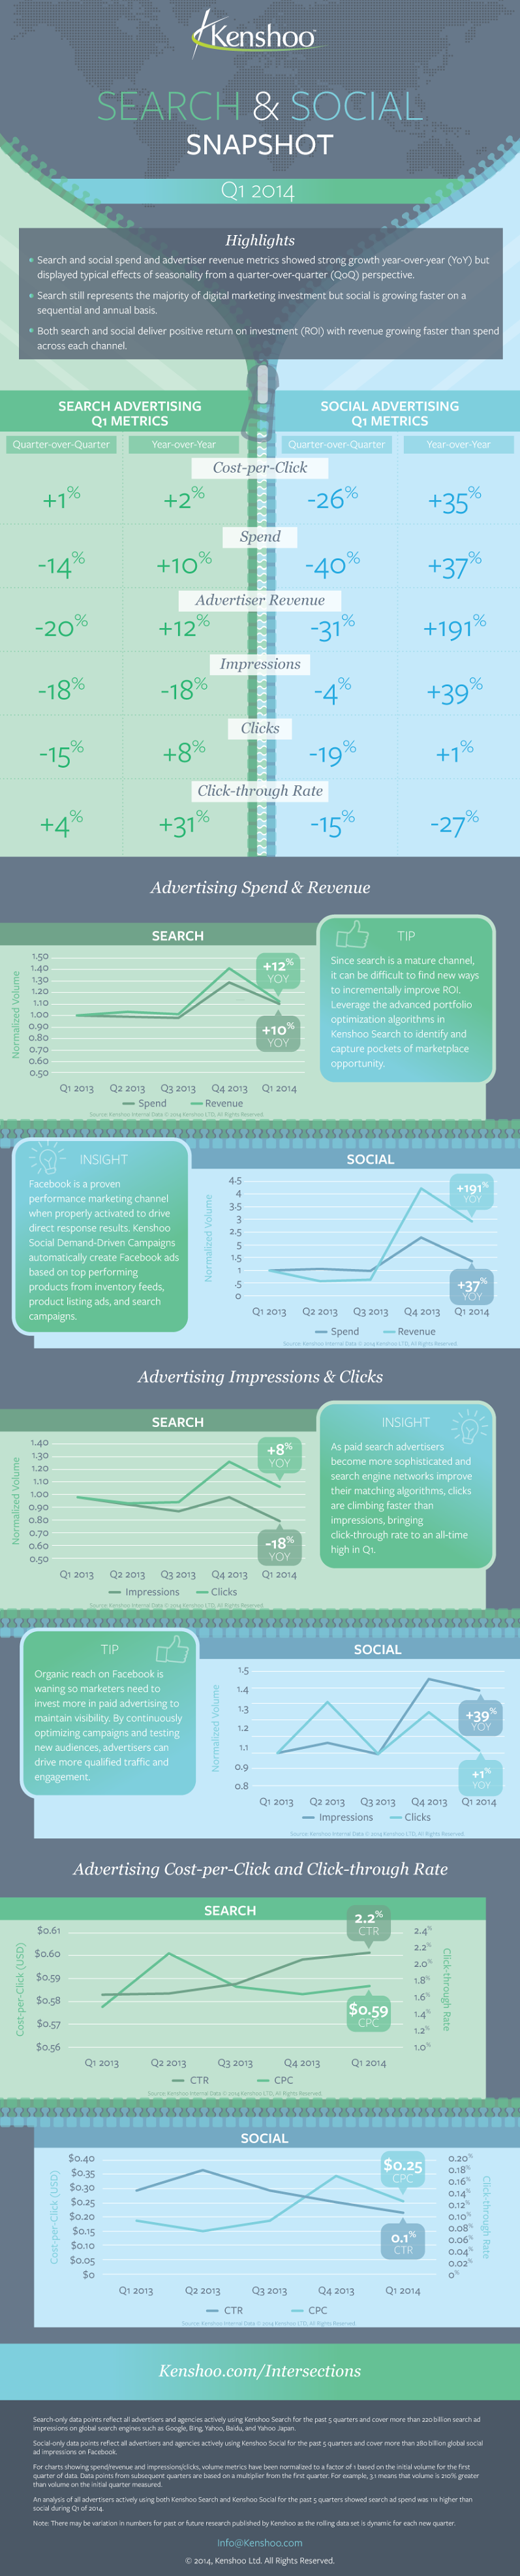 Infographic: search versus social advertising - which saw a 191% year-on-year revenue increase?